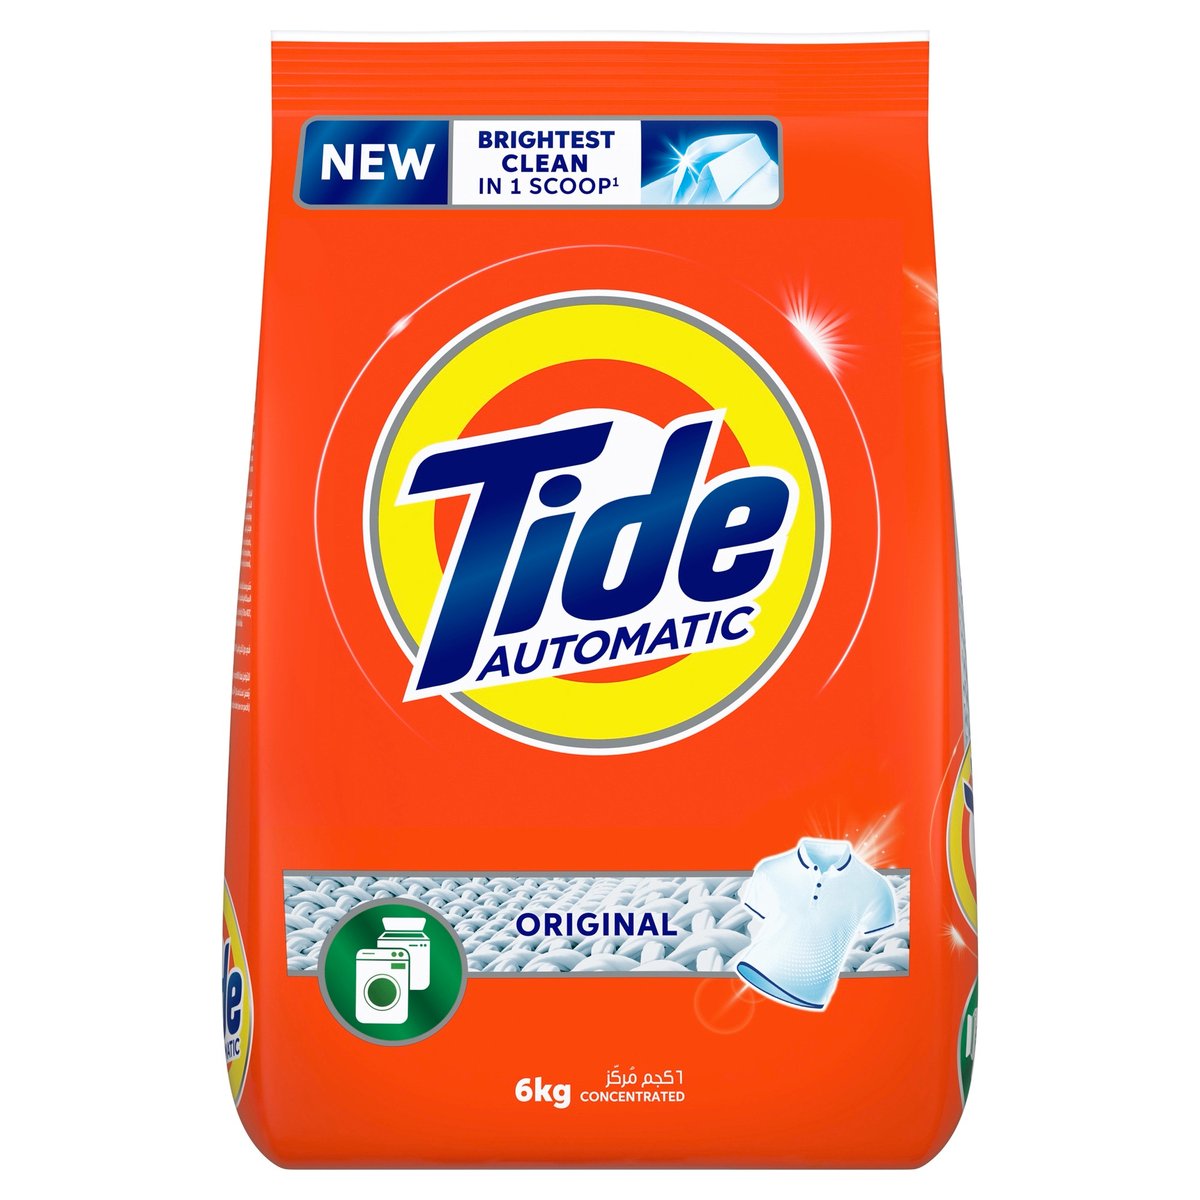 Buy Tide Automatic Powder Laundry Detergent Original Scent 6kg Online at Best Price | Front load washing powders | Lulu UAE in UAE